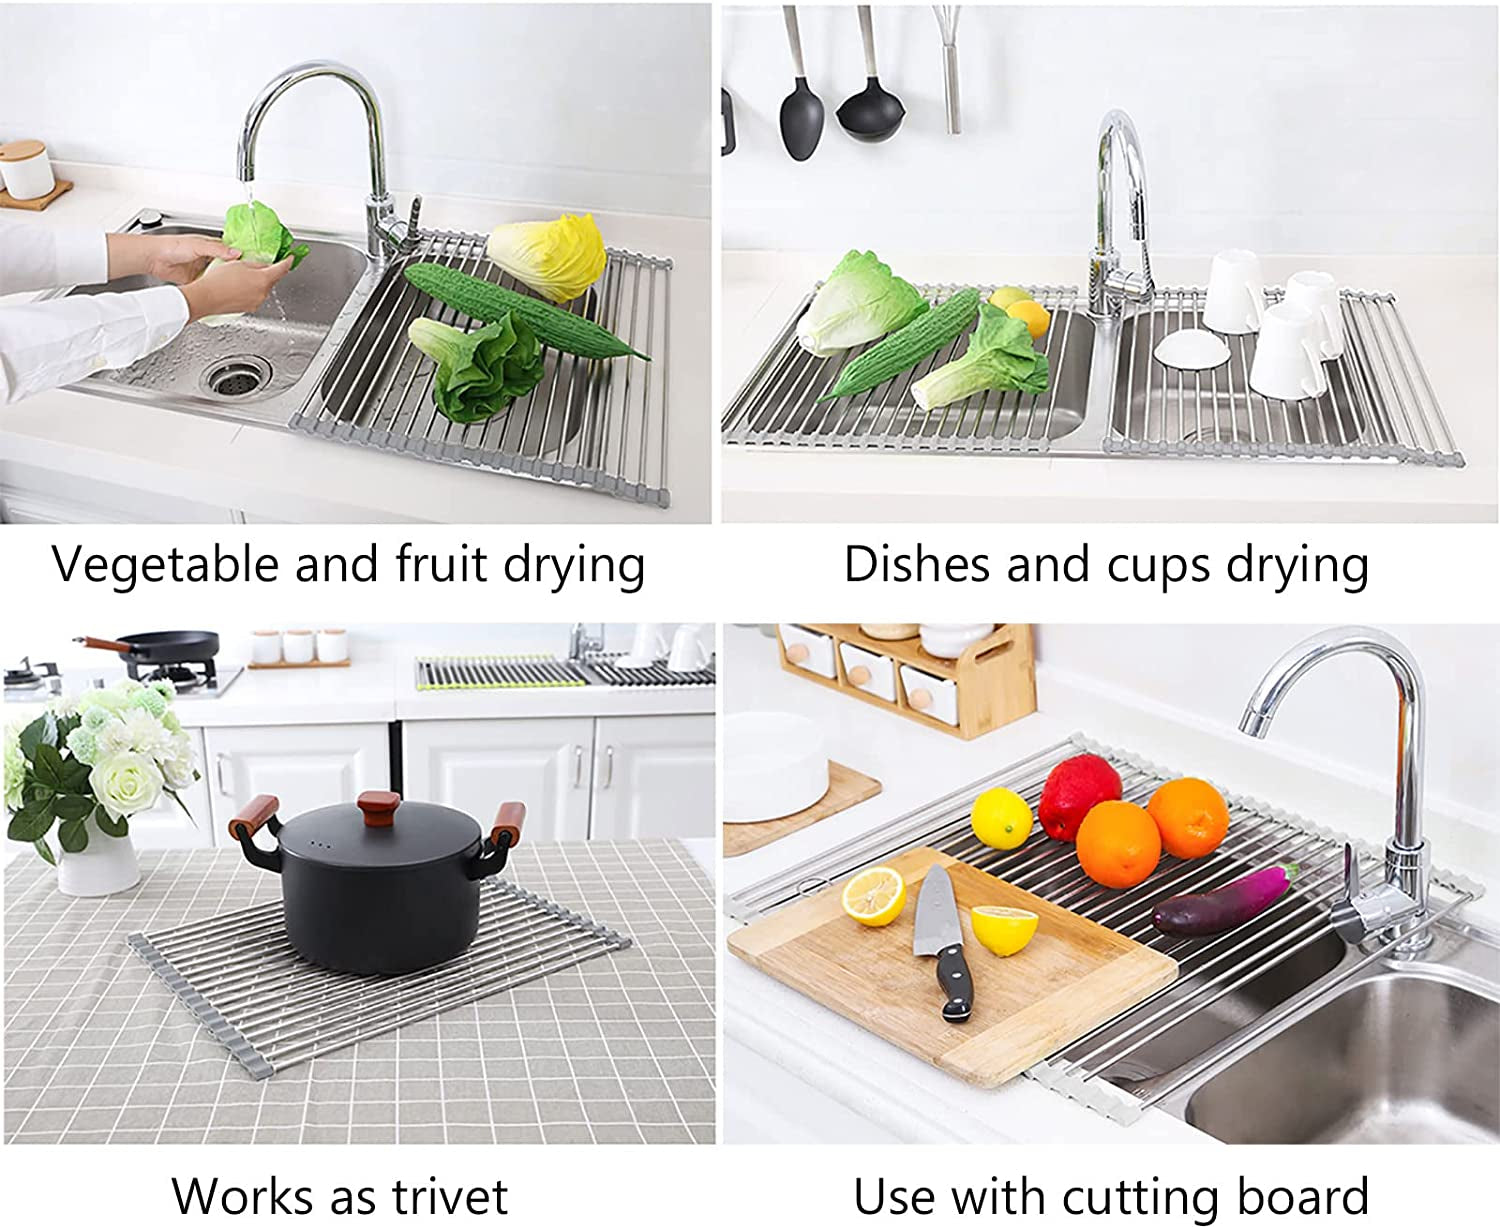 17.7" X 15.5" Roll up Dish Drying Rack over Sink Drying Rack Sink Cover Kitchen Sink Accessories Gadget Multipurpose Organizer Foldable Stainless Steel Drainer (Grey)